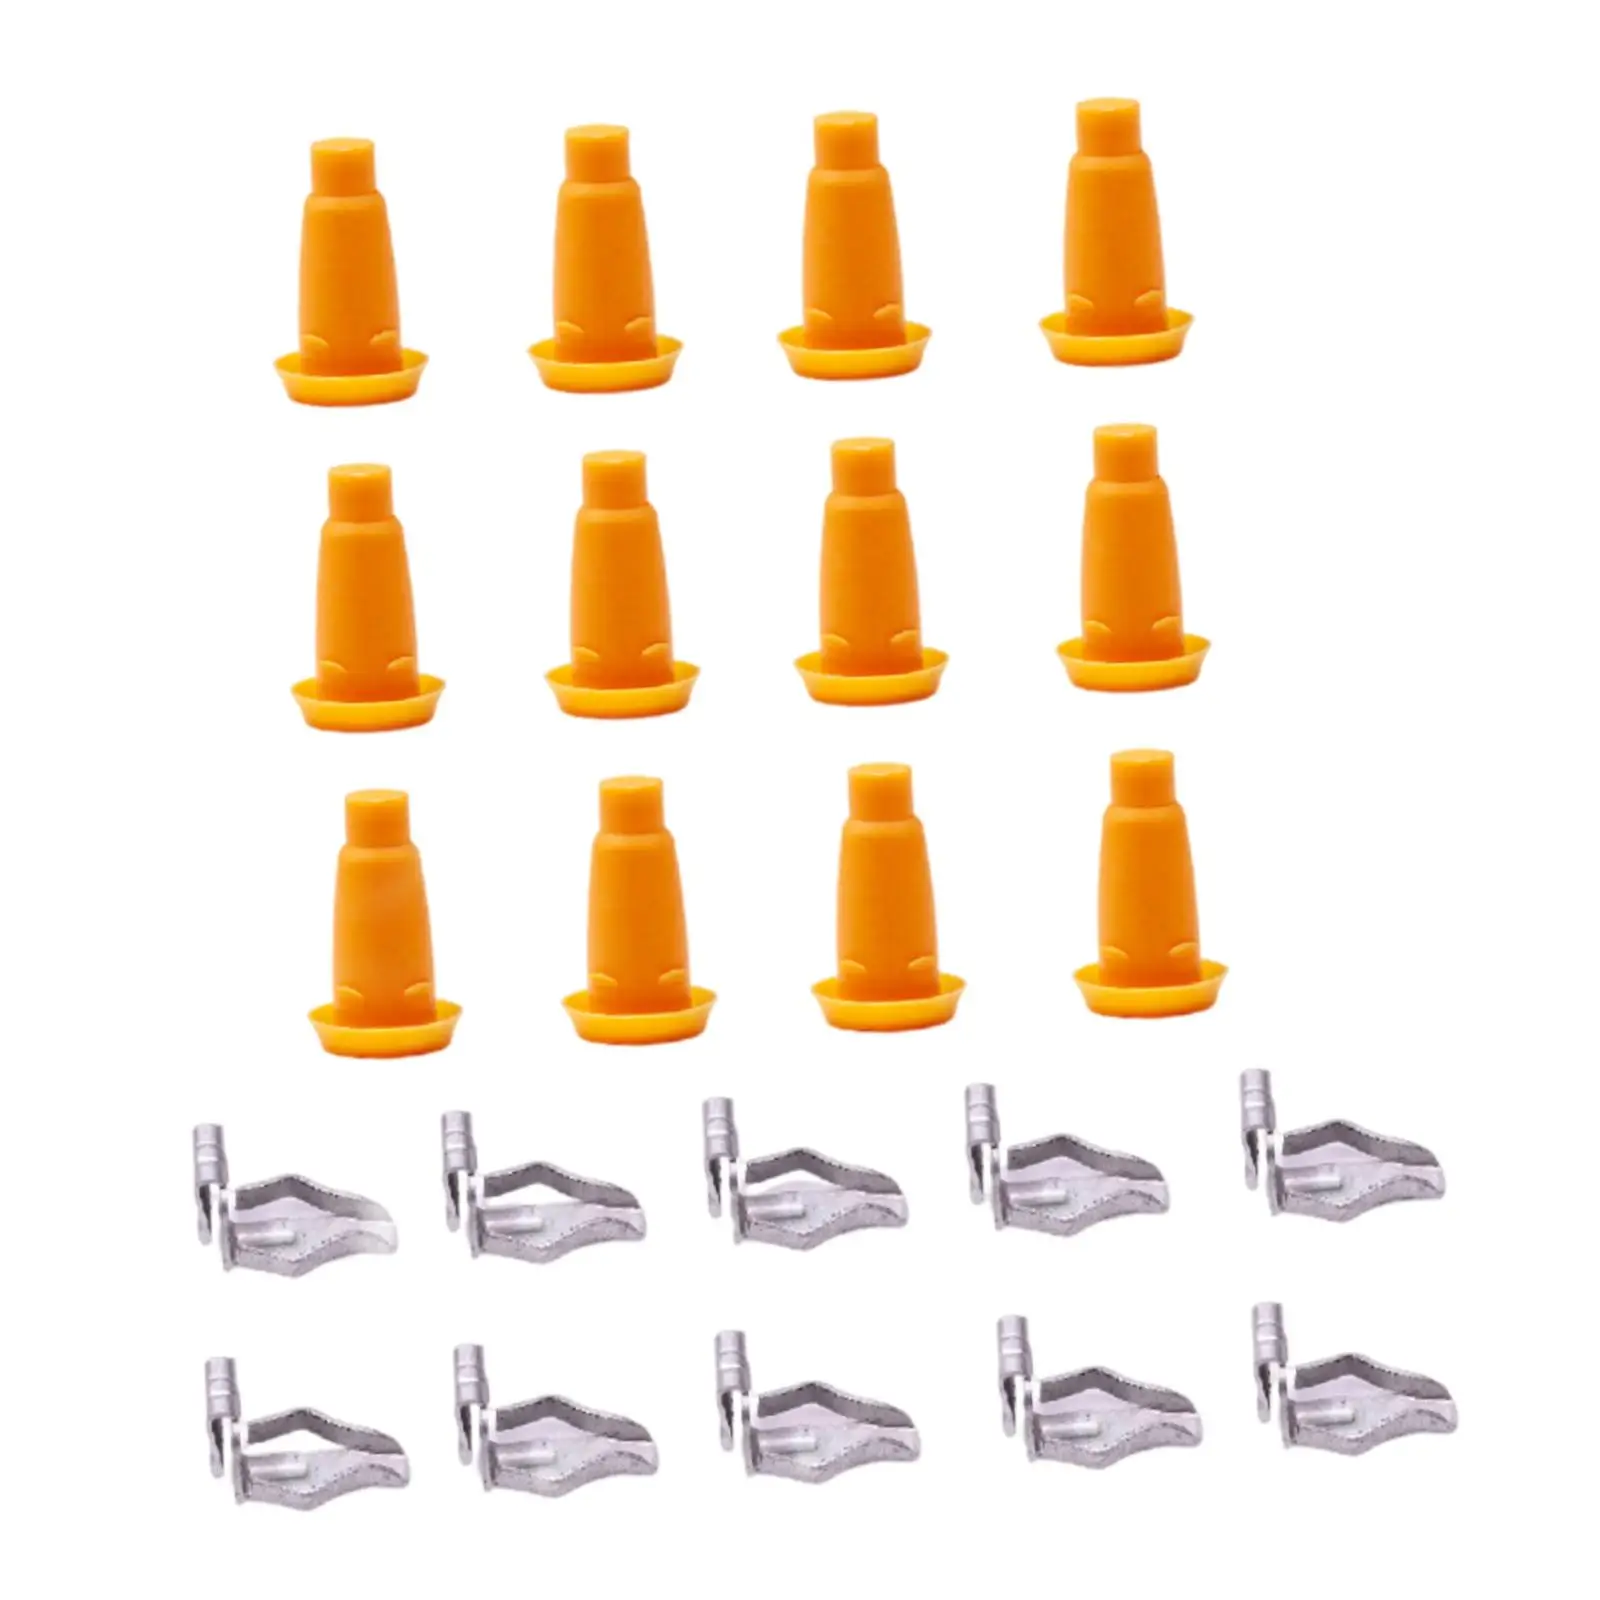 24Pcs Door Panel Frame Plugs & Clips Replacement 4500027 4853962 for Chevy Camaro Nova Chevelle Fullsize Stable Performance